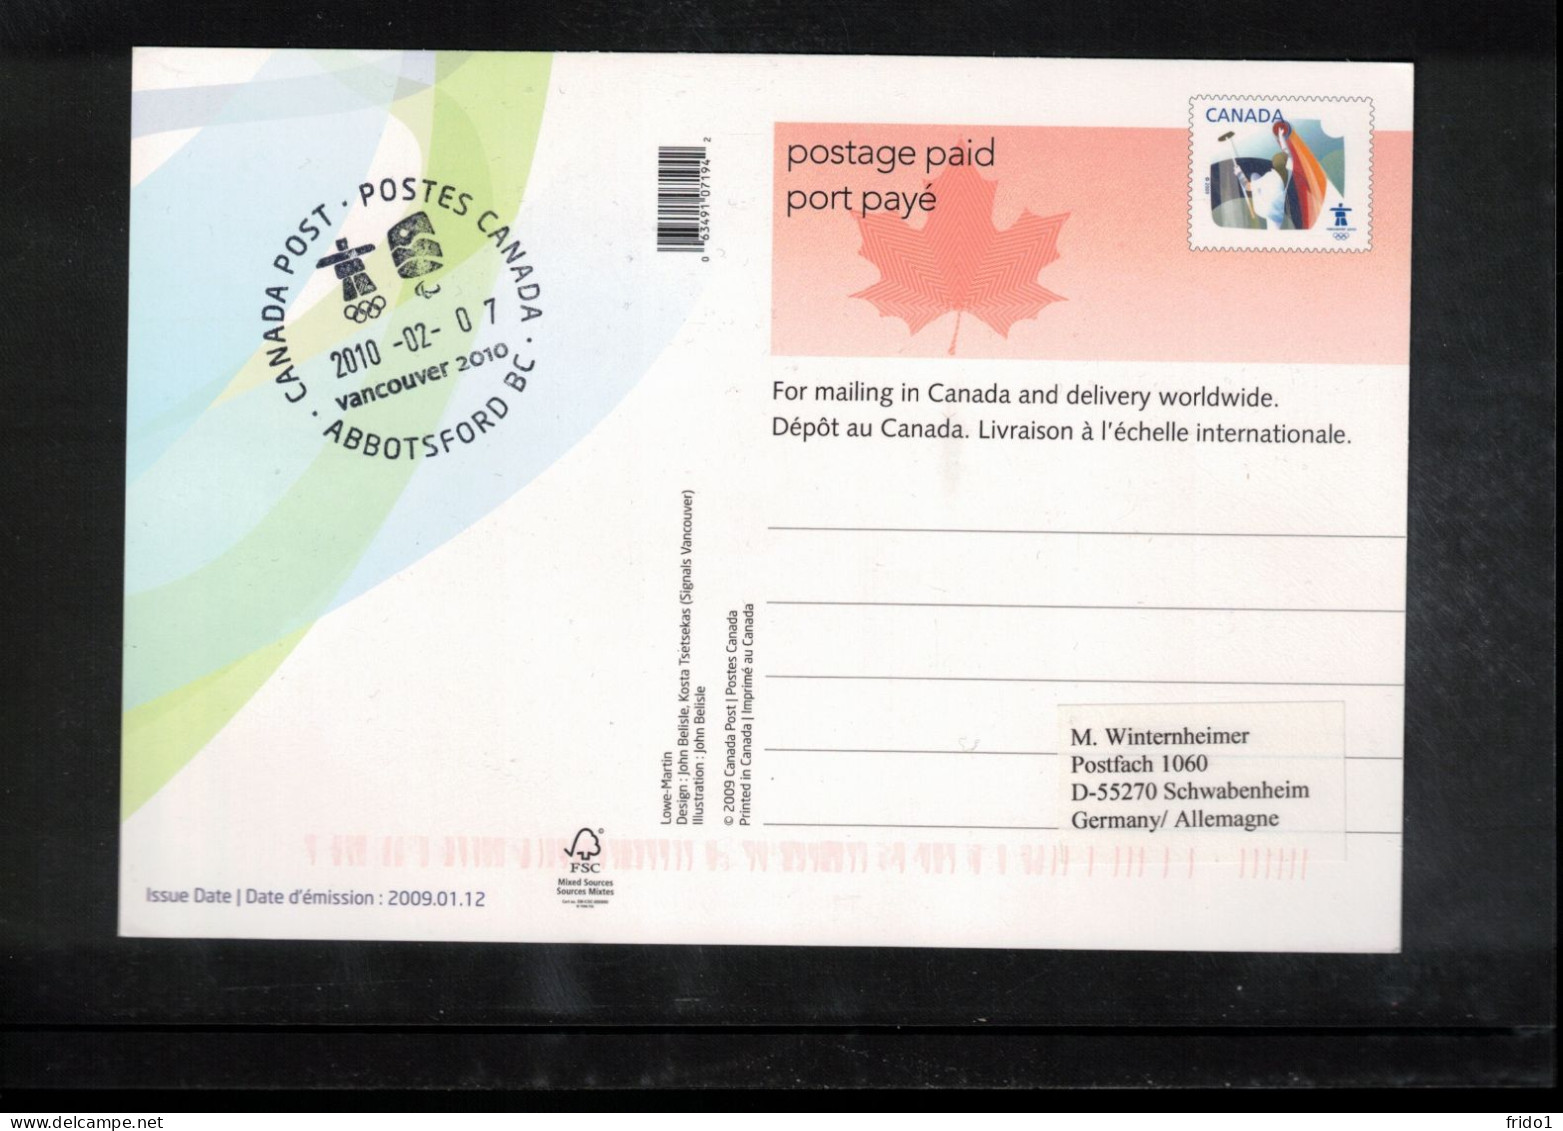 Canada 2010 Olympic Games Vancouver - ABBOTSFORD BC Postmark Interesting Postcard - Winter 2010: Vancouver